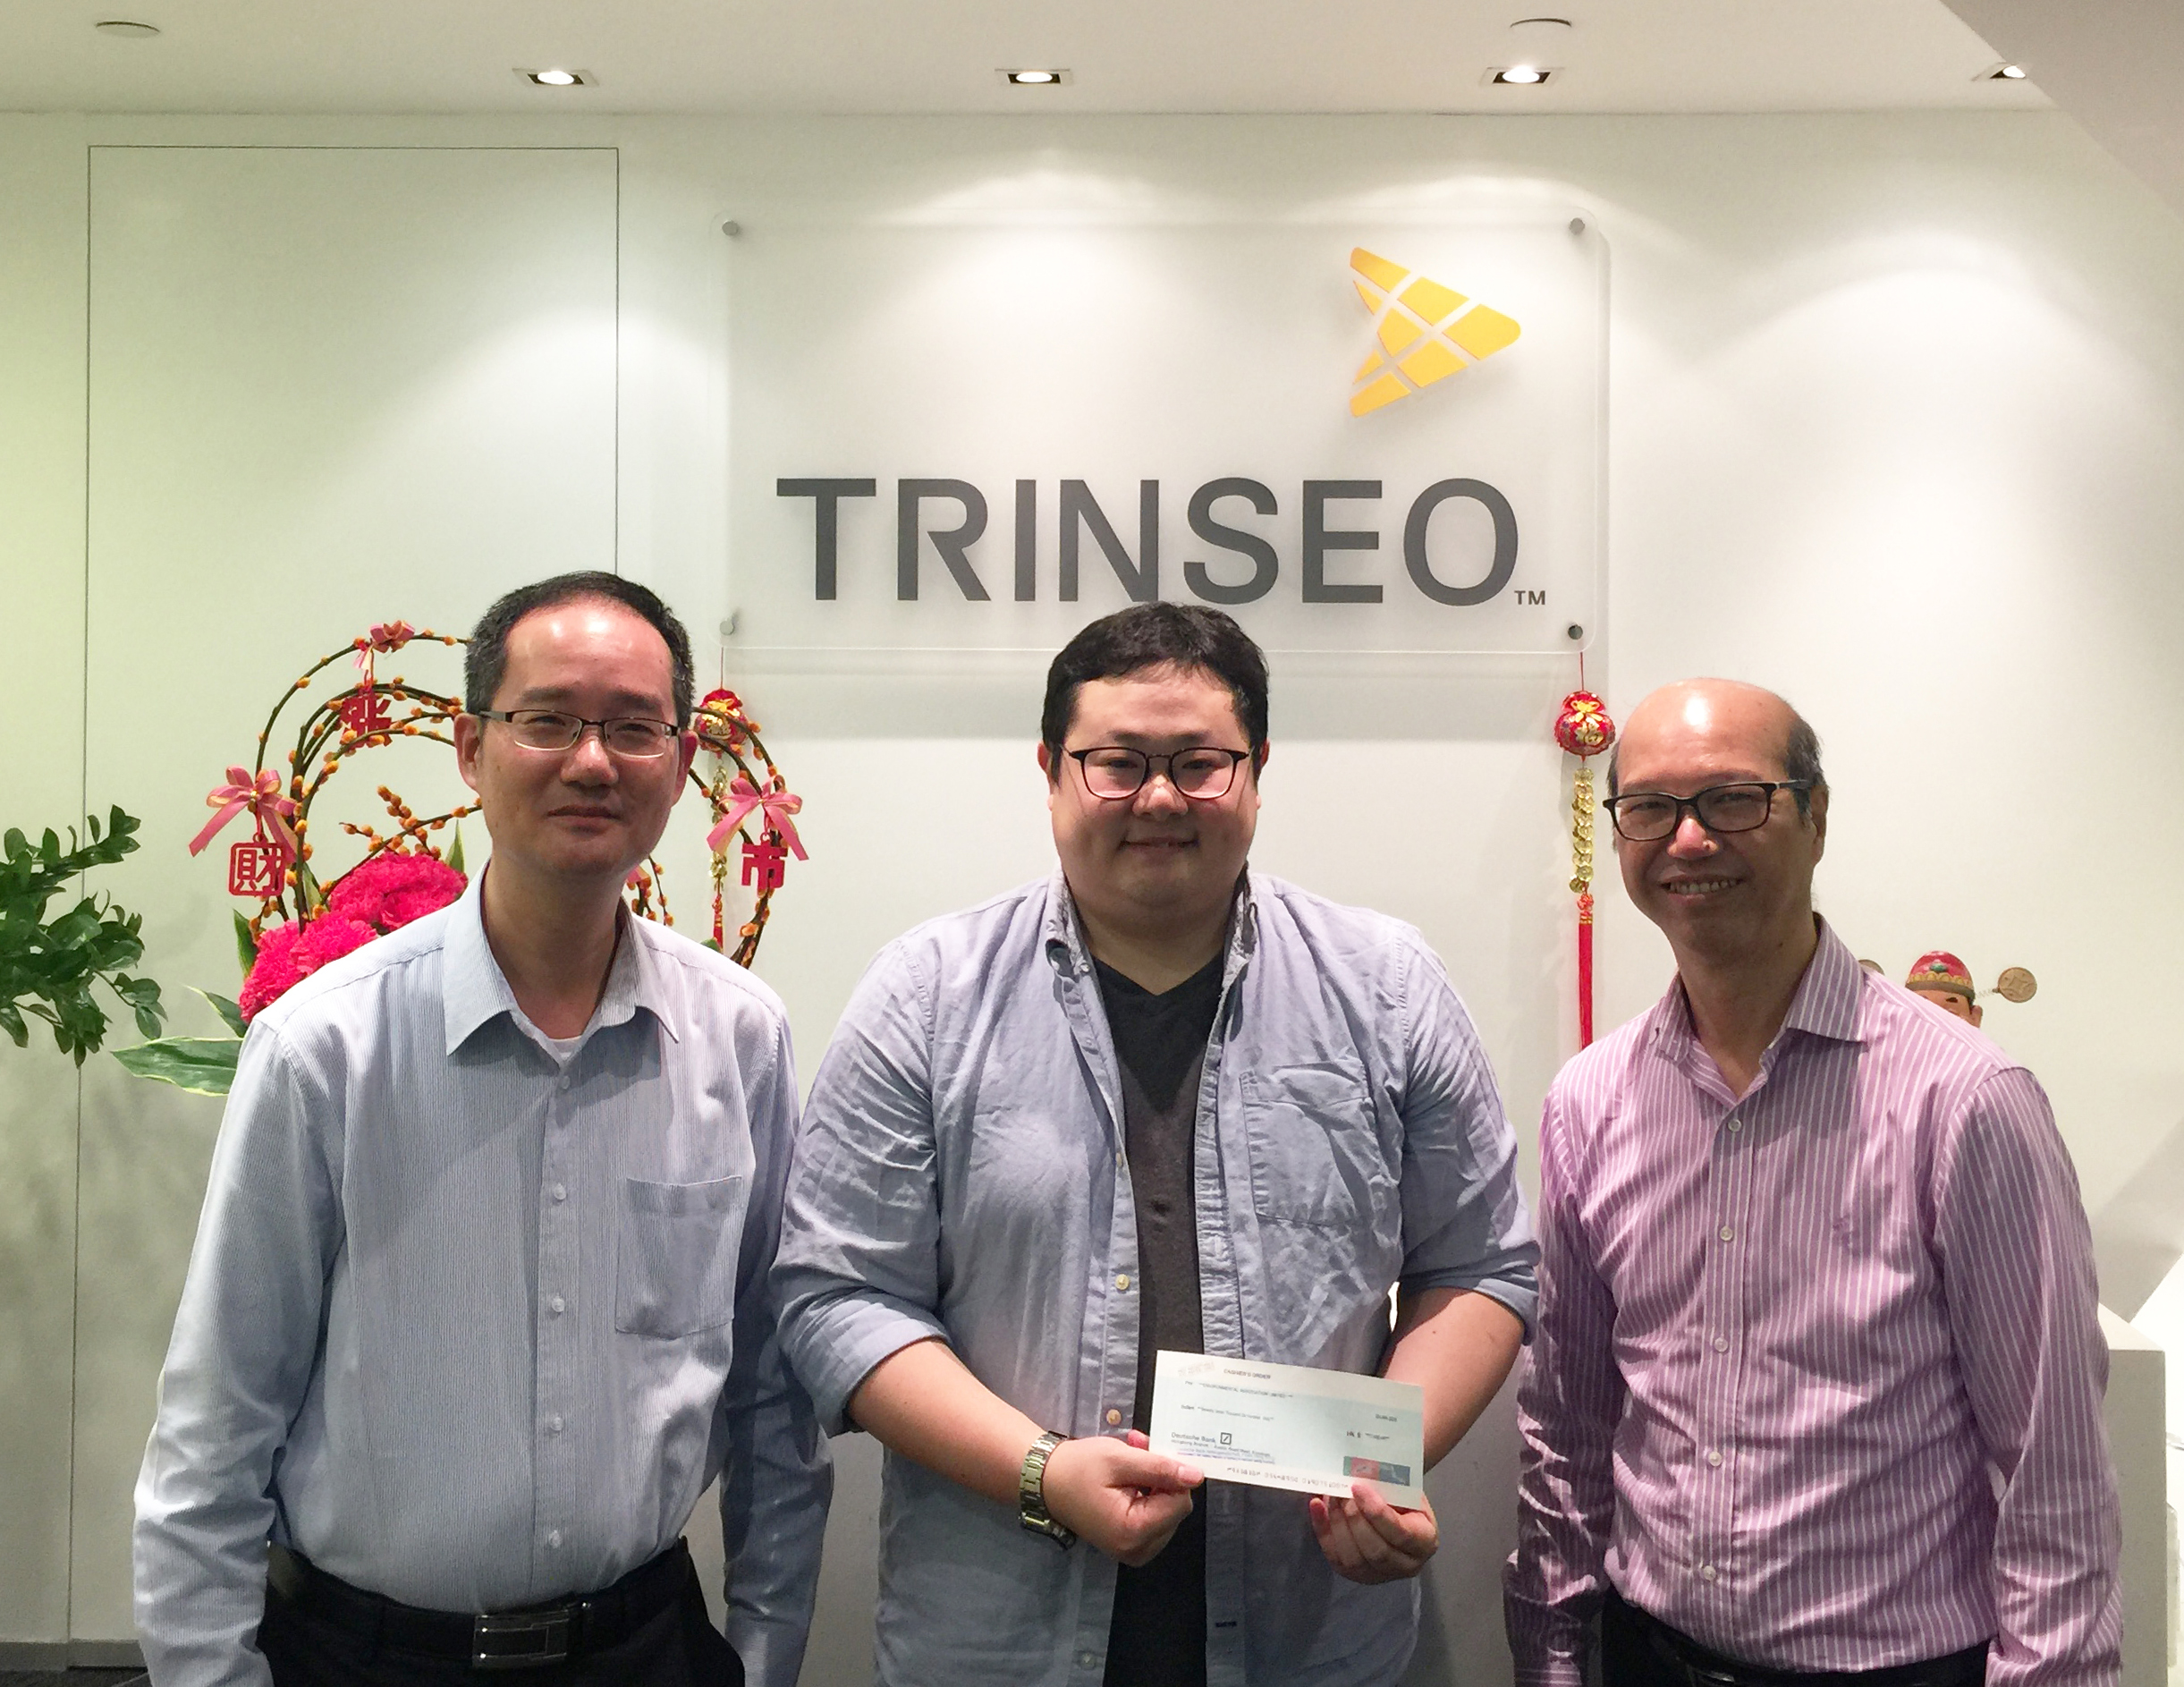 Trinseo employees